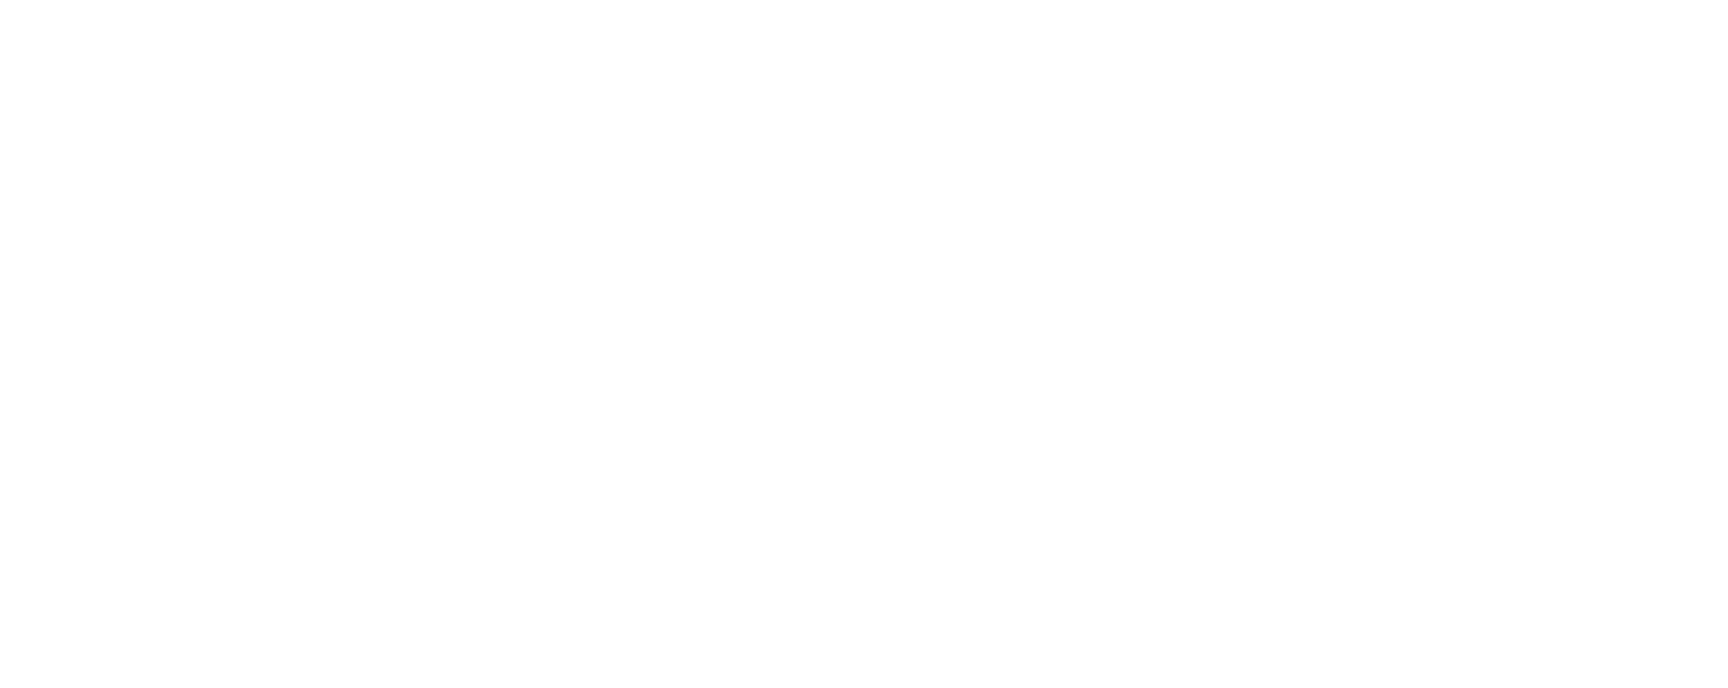 Amaterra: for the love of the earth